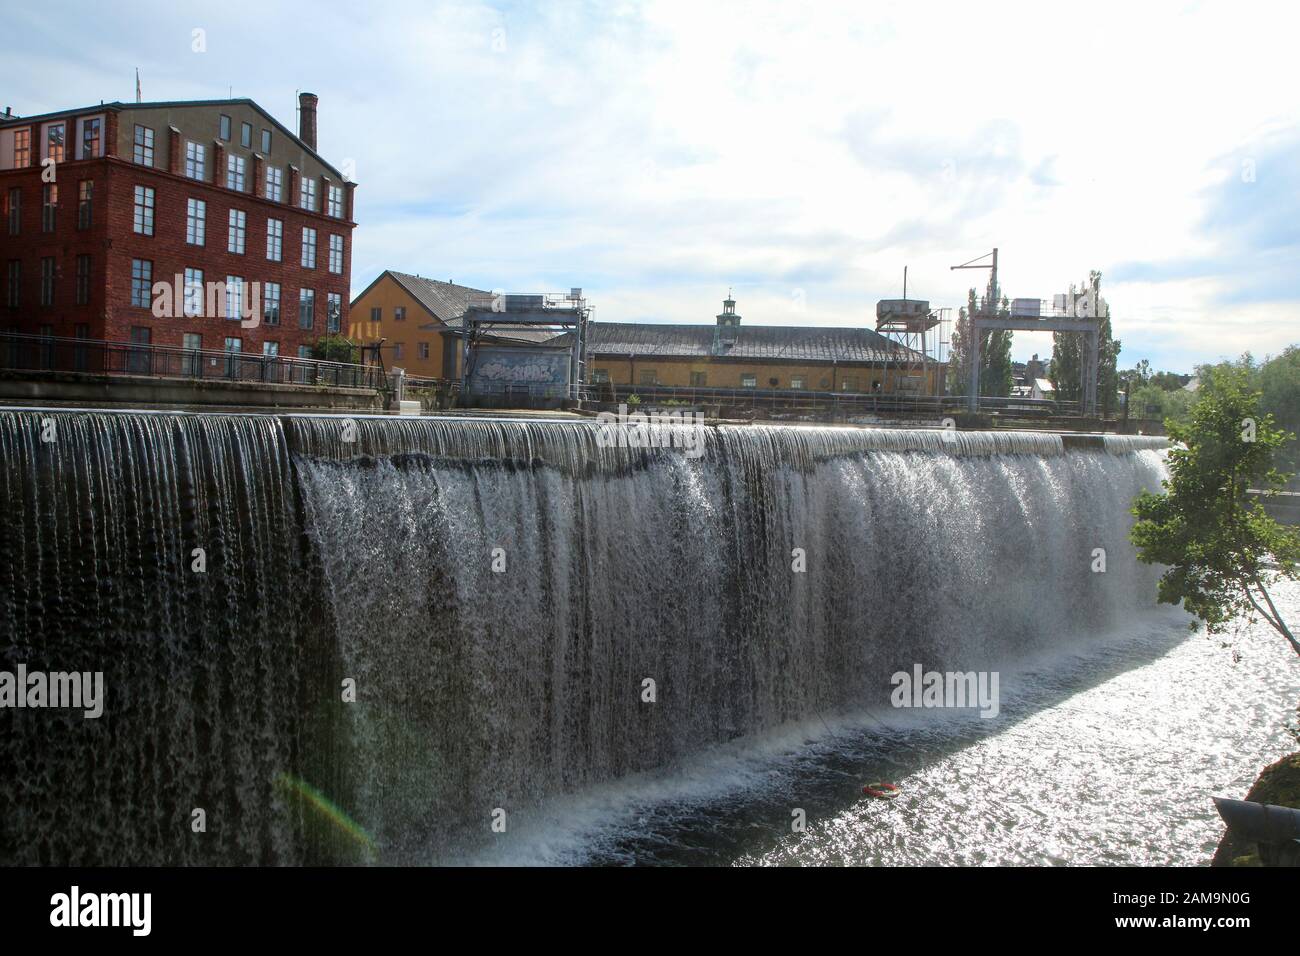 The Industrial center of the city of Norrköping in Sweden. The nice Industrial buildings with typical nordic design surrounded by water. Stock Photo